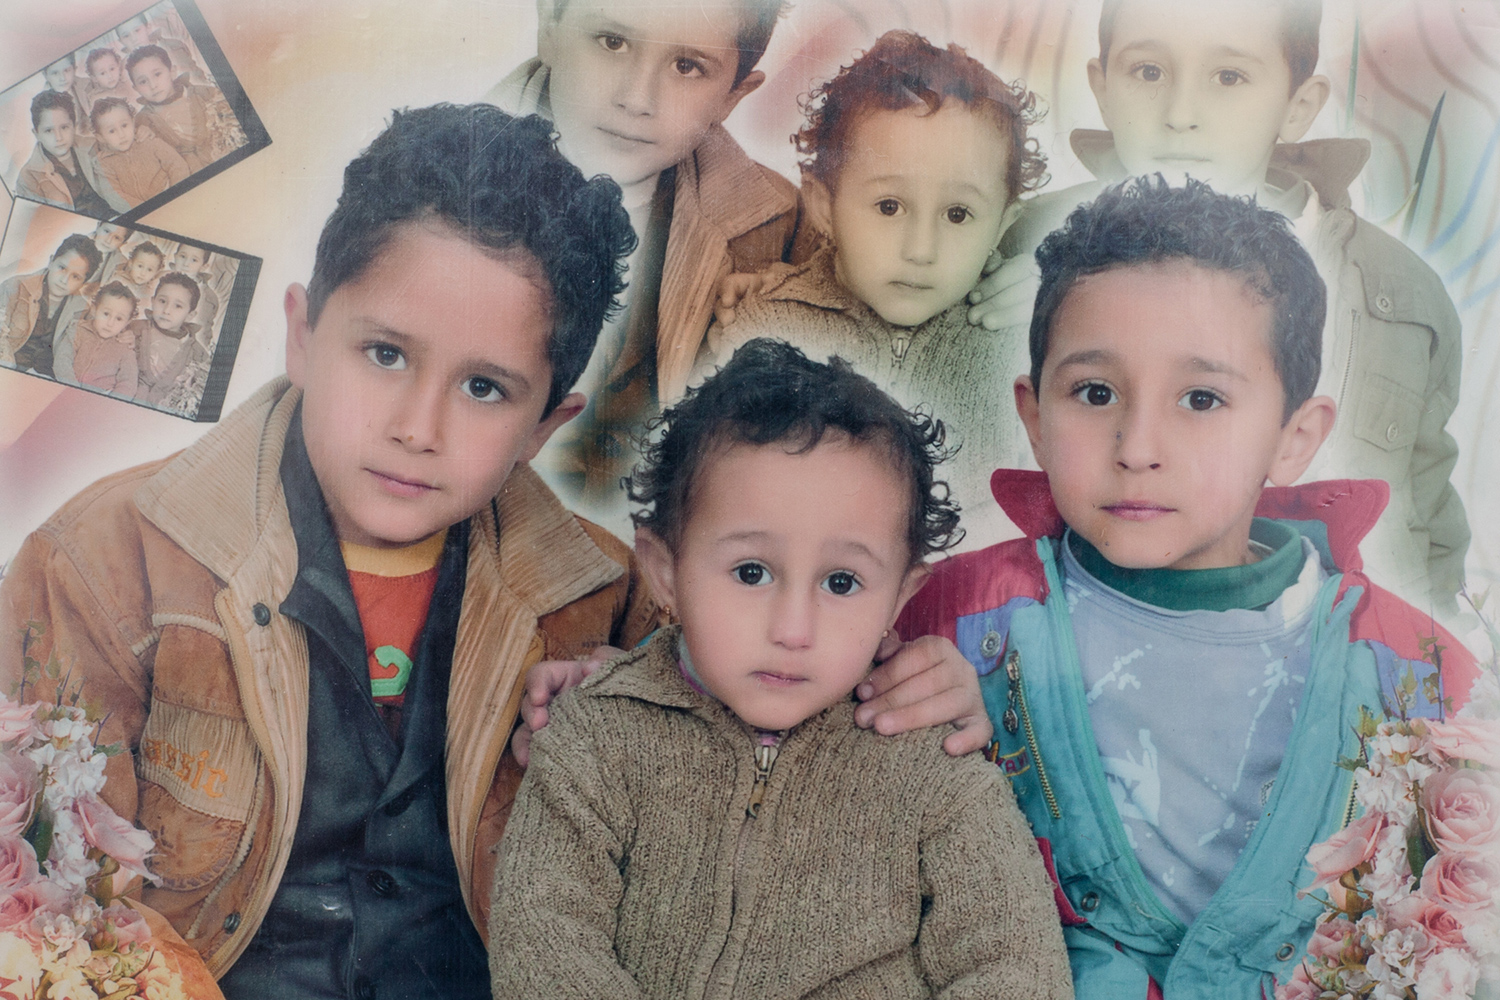 Siblings Aghyad, Hanin and Mohammad Ghassan Al-Jughmani in an old family photo that the family brought with them when they fled Dara'a, Syria, for Jordan.